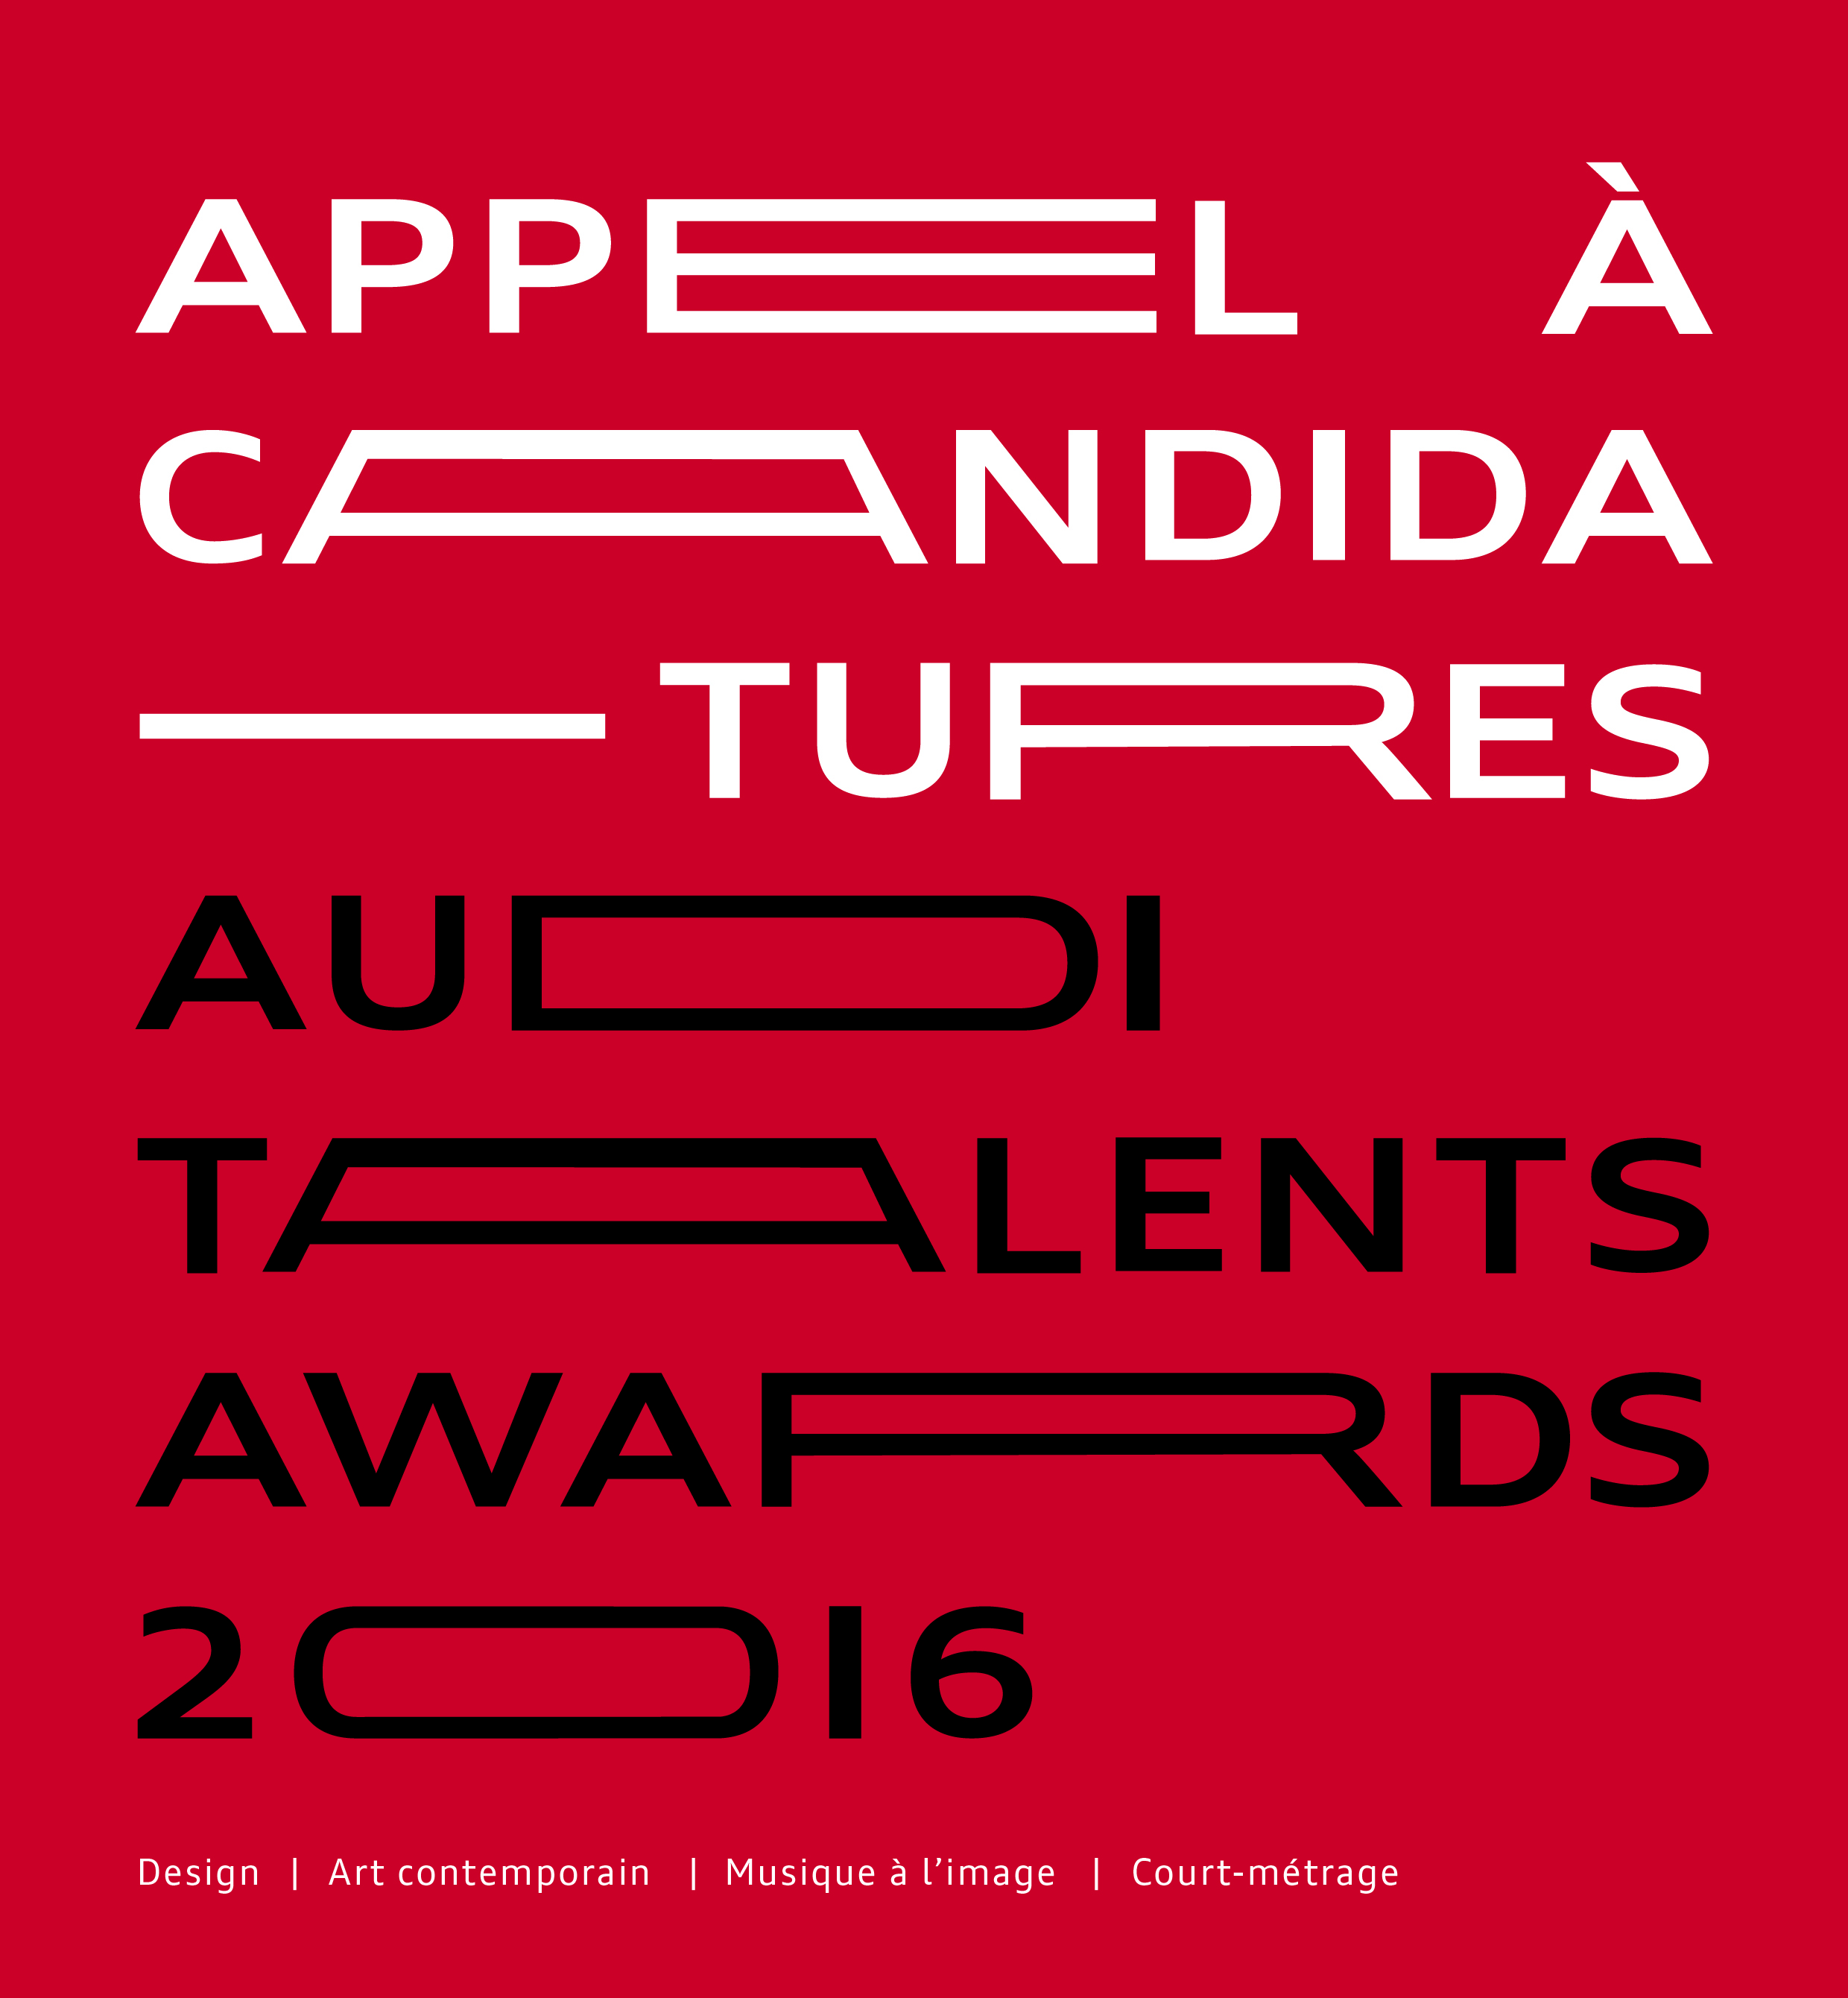 AUDI TALENTS AWARDS CALLS IN FOR SUBMISSION !